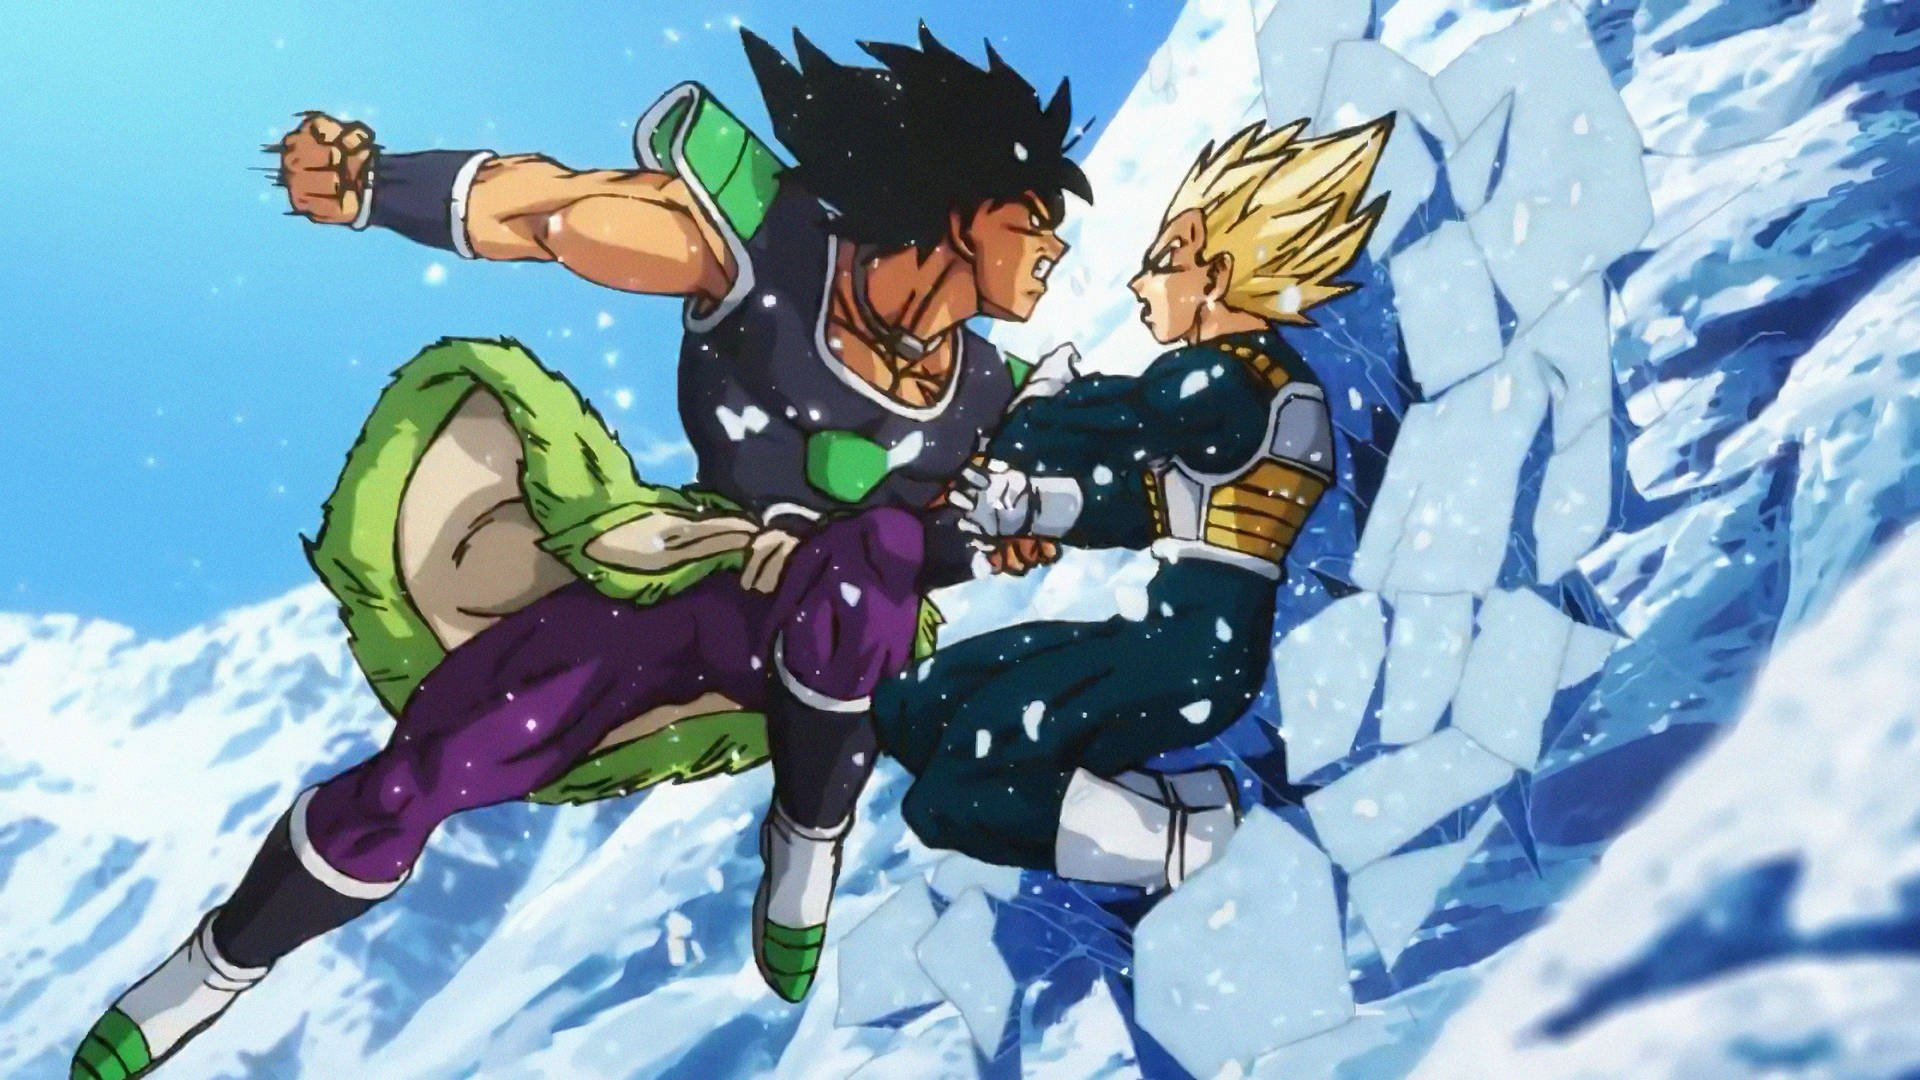 Broly and Vegeta face off in a moment of explosive energy Wallpaper